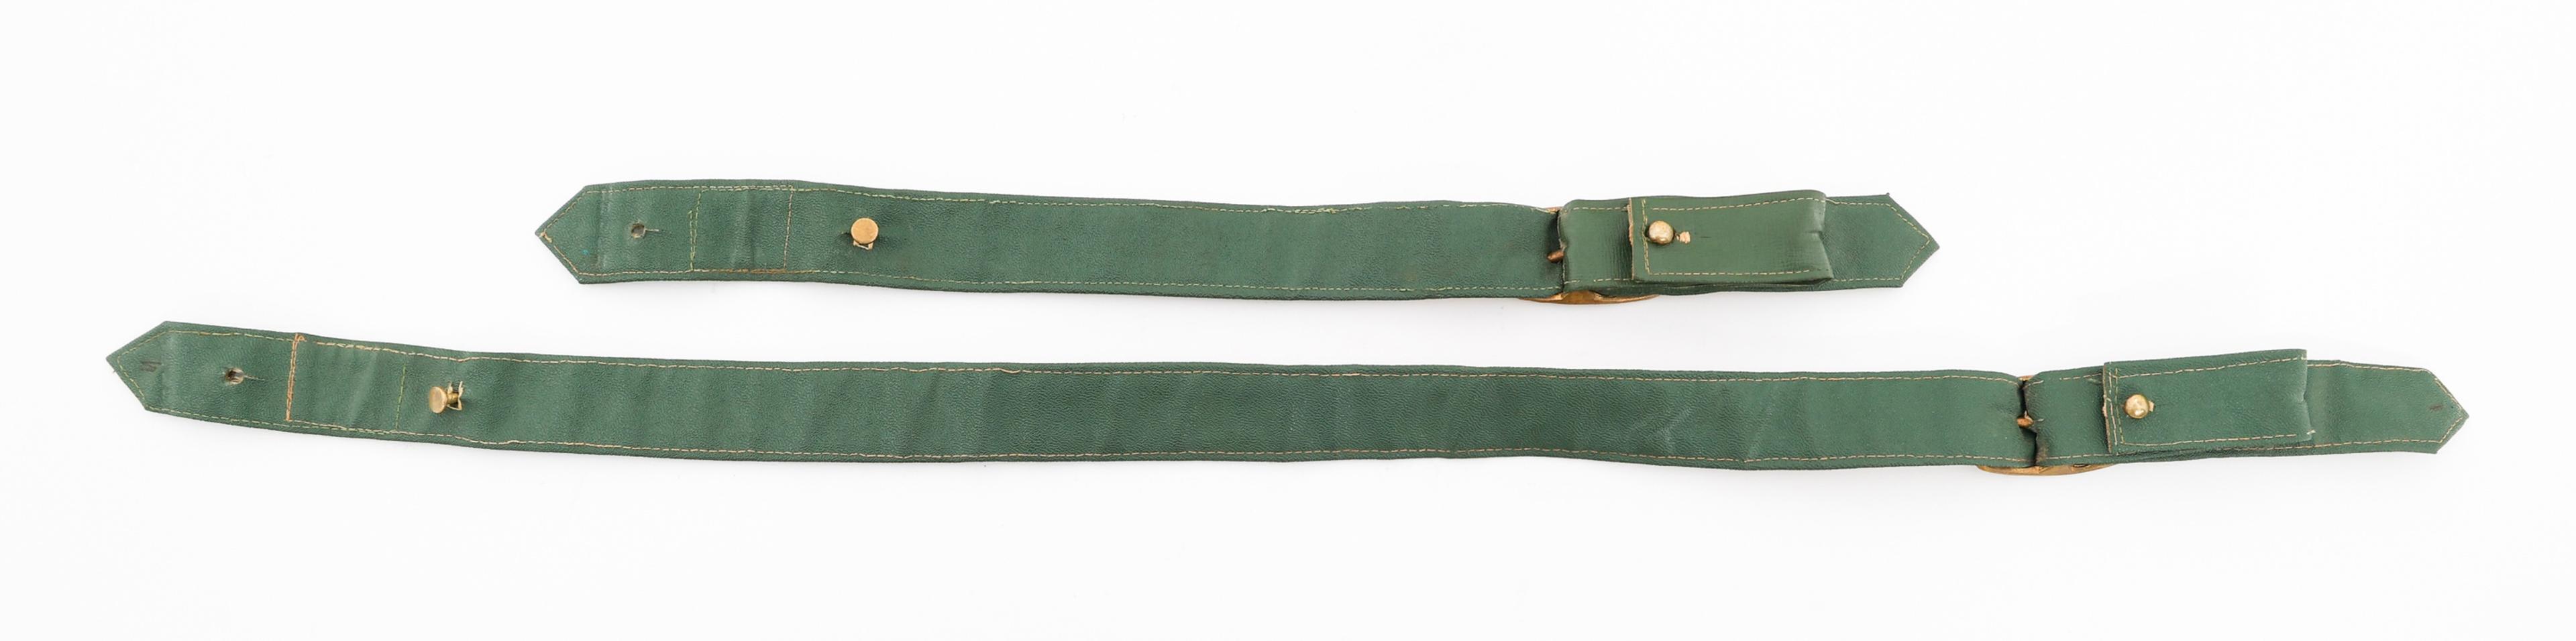 MID-19th C. - WWII BRITISH FUSILIERS & GUARD BELTS